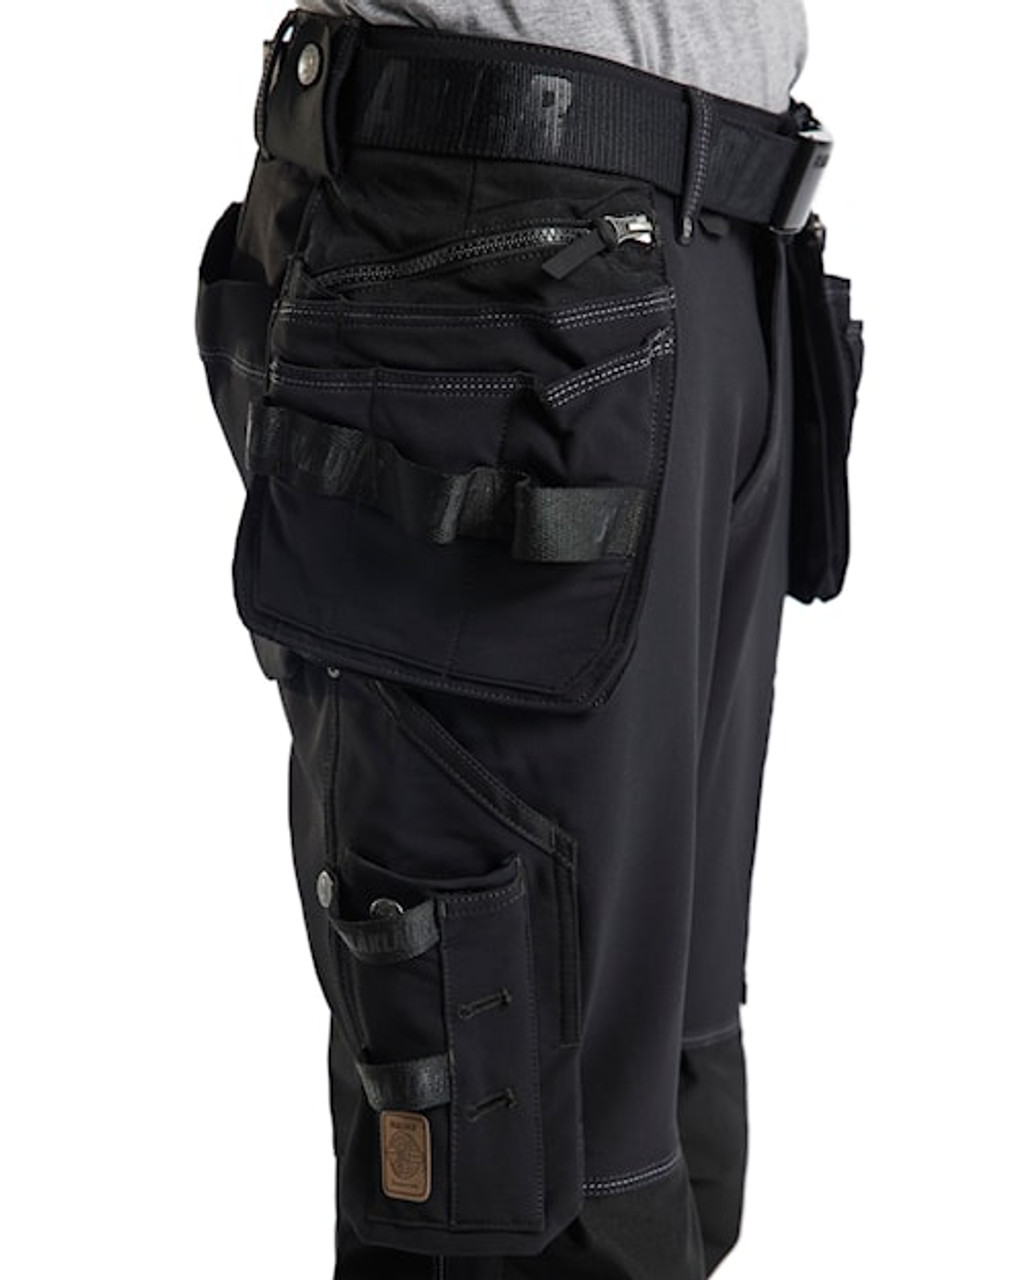 BLAKLADER Trousers | 1998 Trousers with Holster Pockets for Carpenters, Steelfixers, Electricians and  in Melbourne